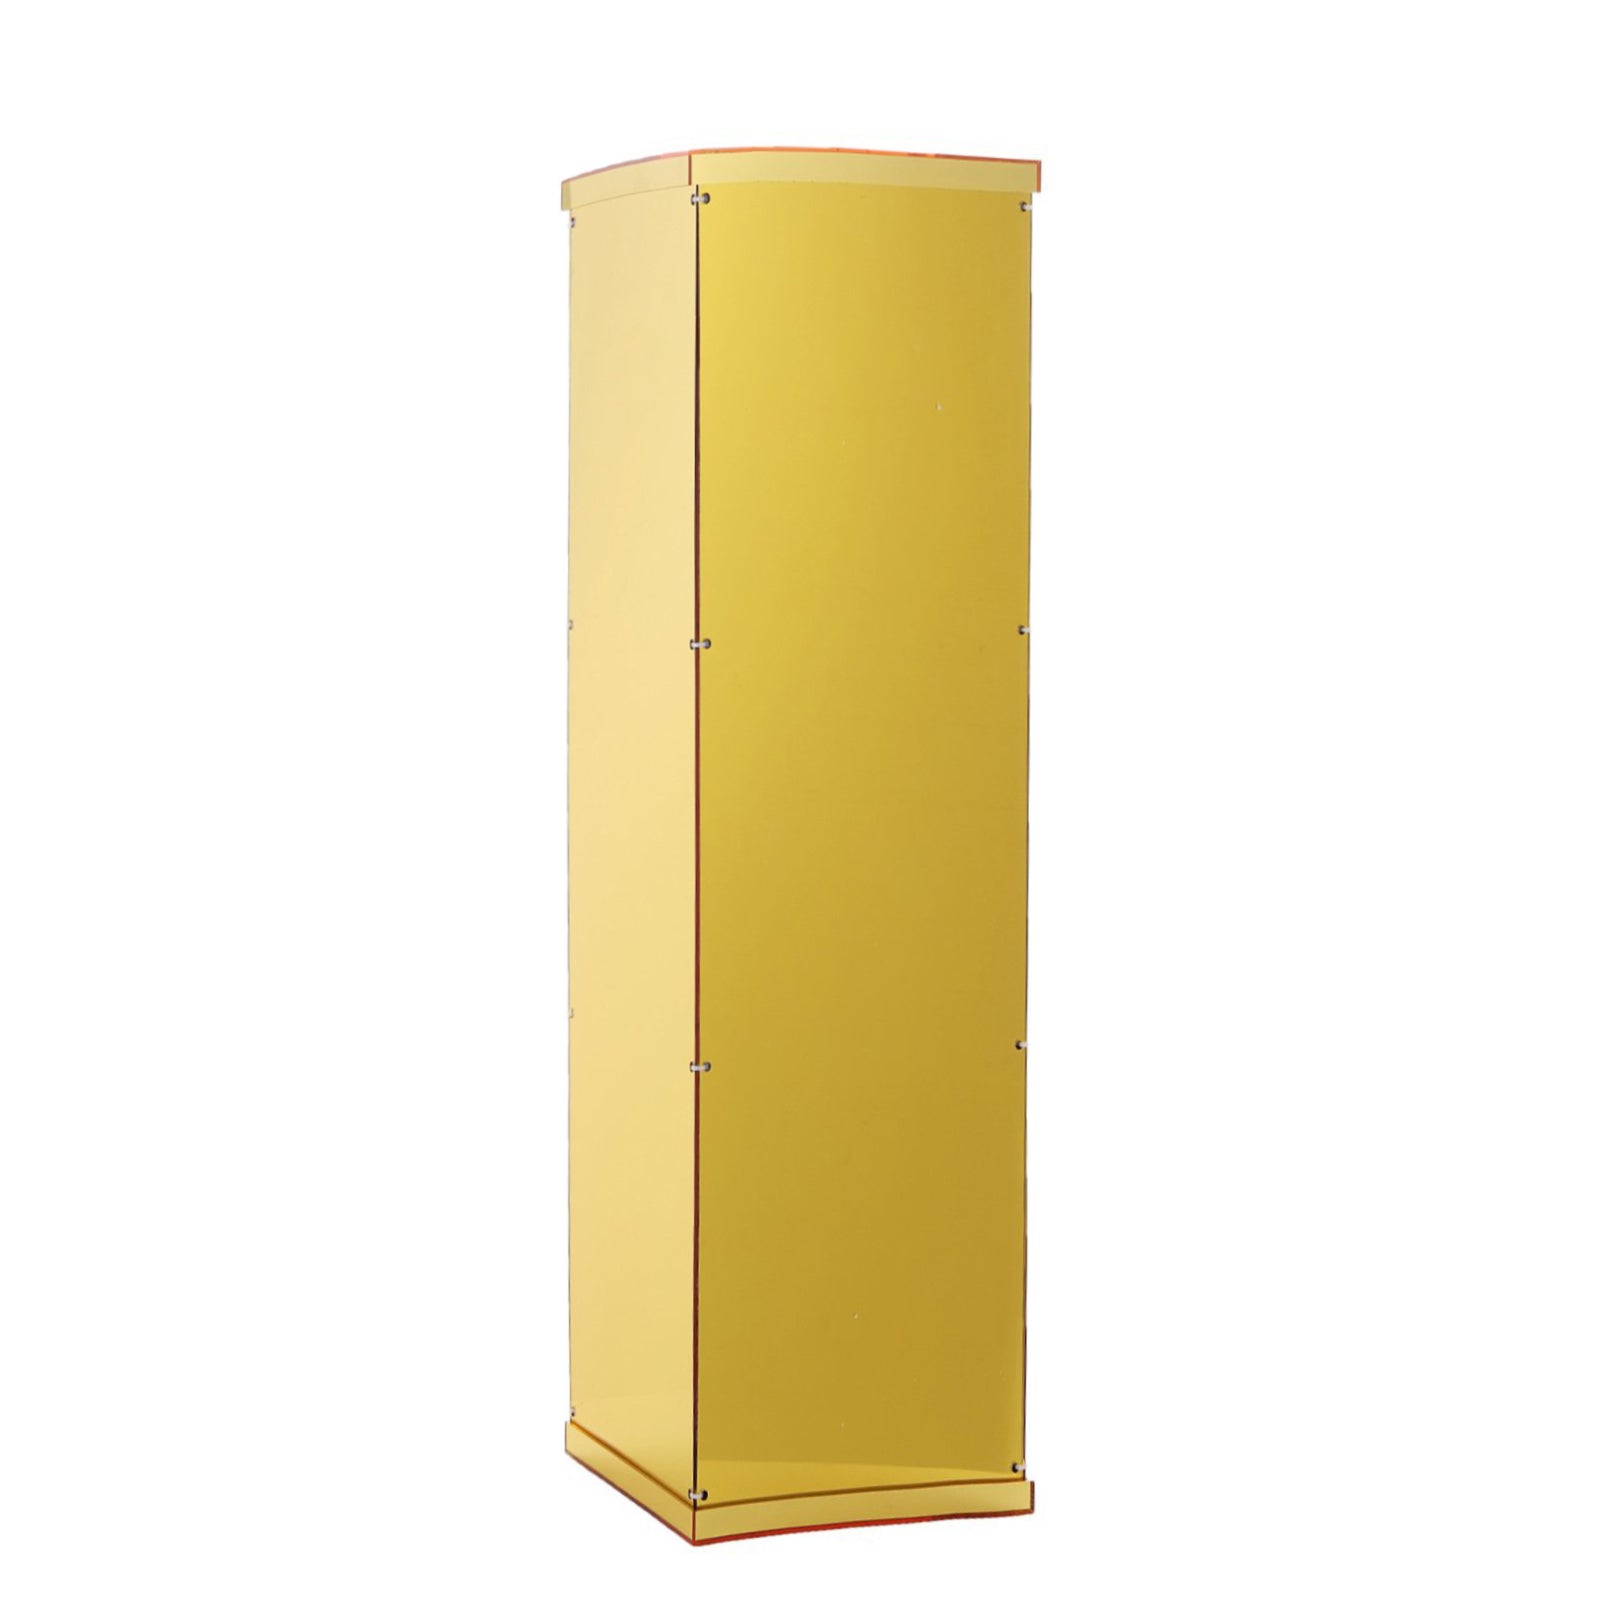 get-your-favorite-players-floor-standing-gold-mirror-finish-acrylic-pedestal-riser-display-box-with-interchangeable-lid-and-base-40-on-sale_17.jpg